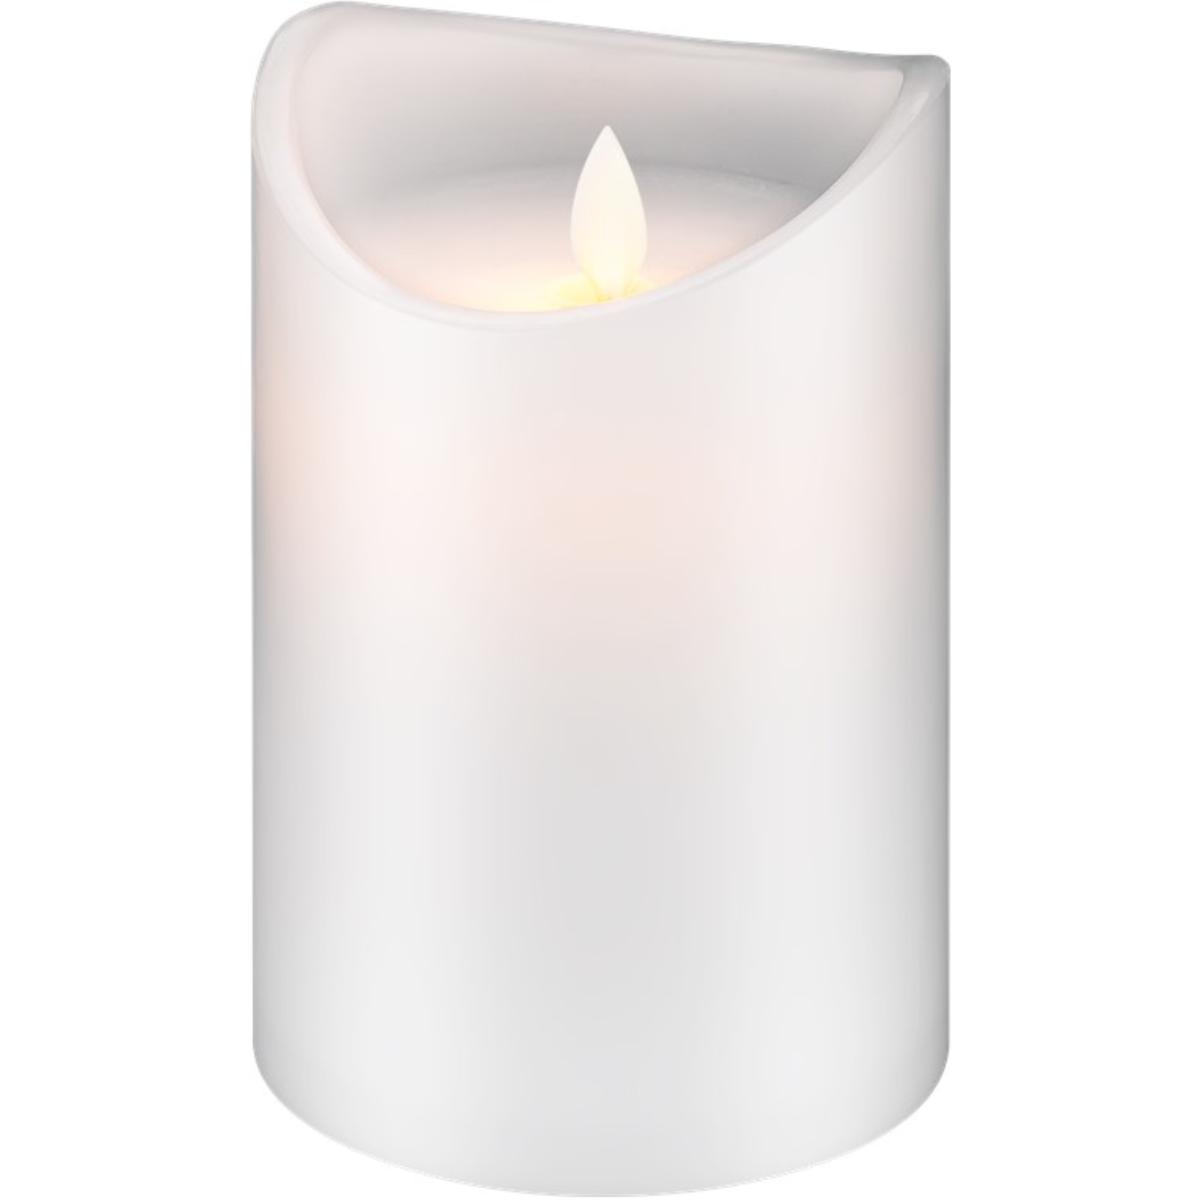 LED white real wax candle, 10 x 15 cm beautiful and safe lighting solu - Goobay